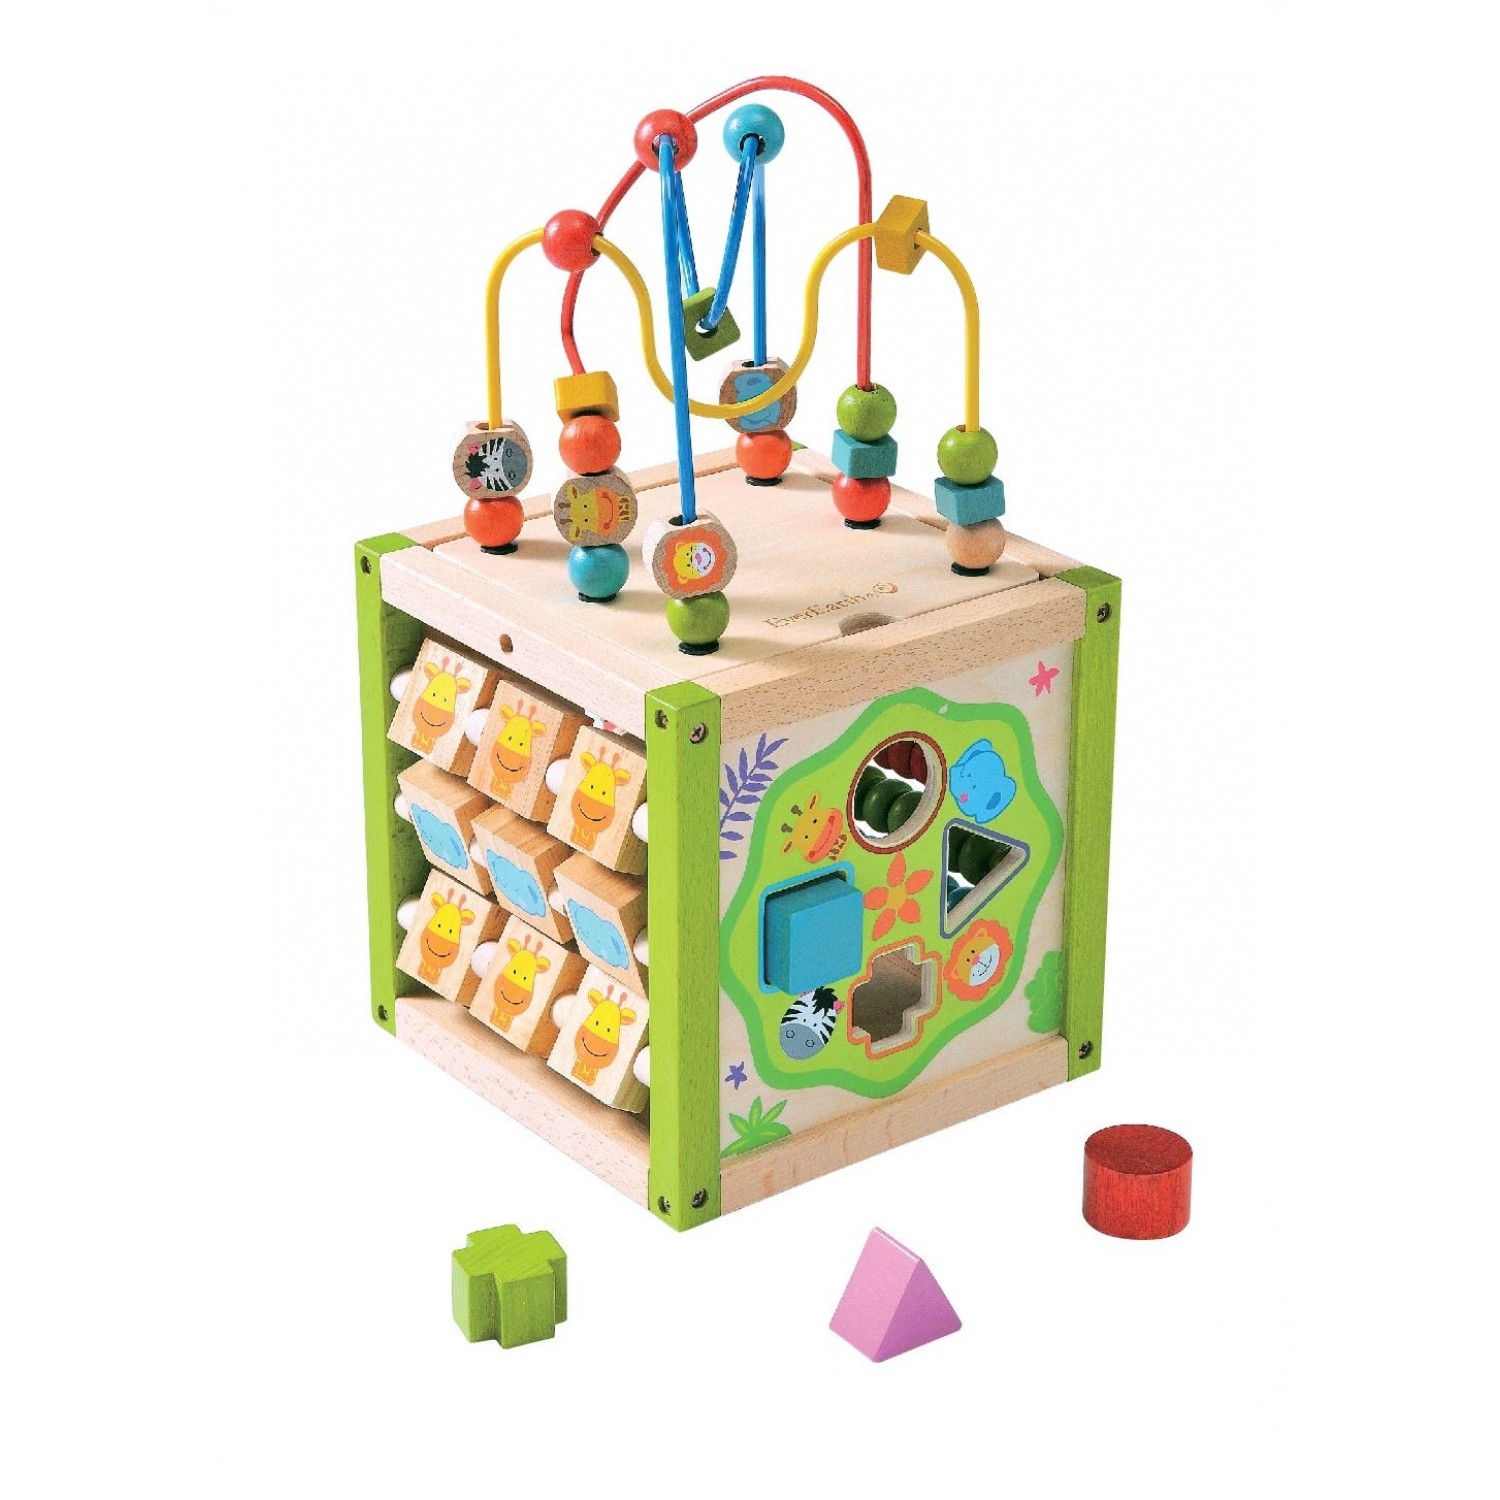 5 in 1 activity cube